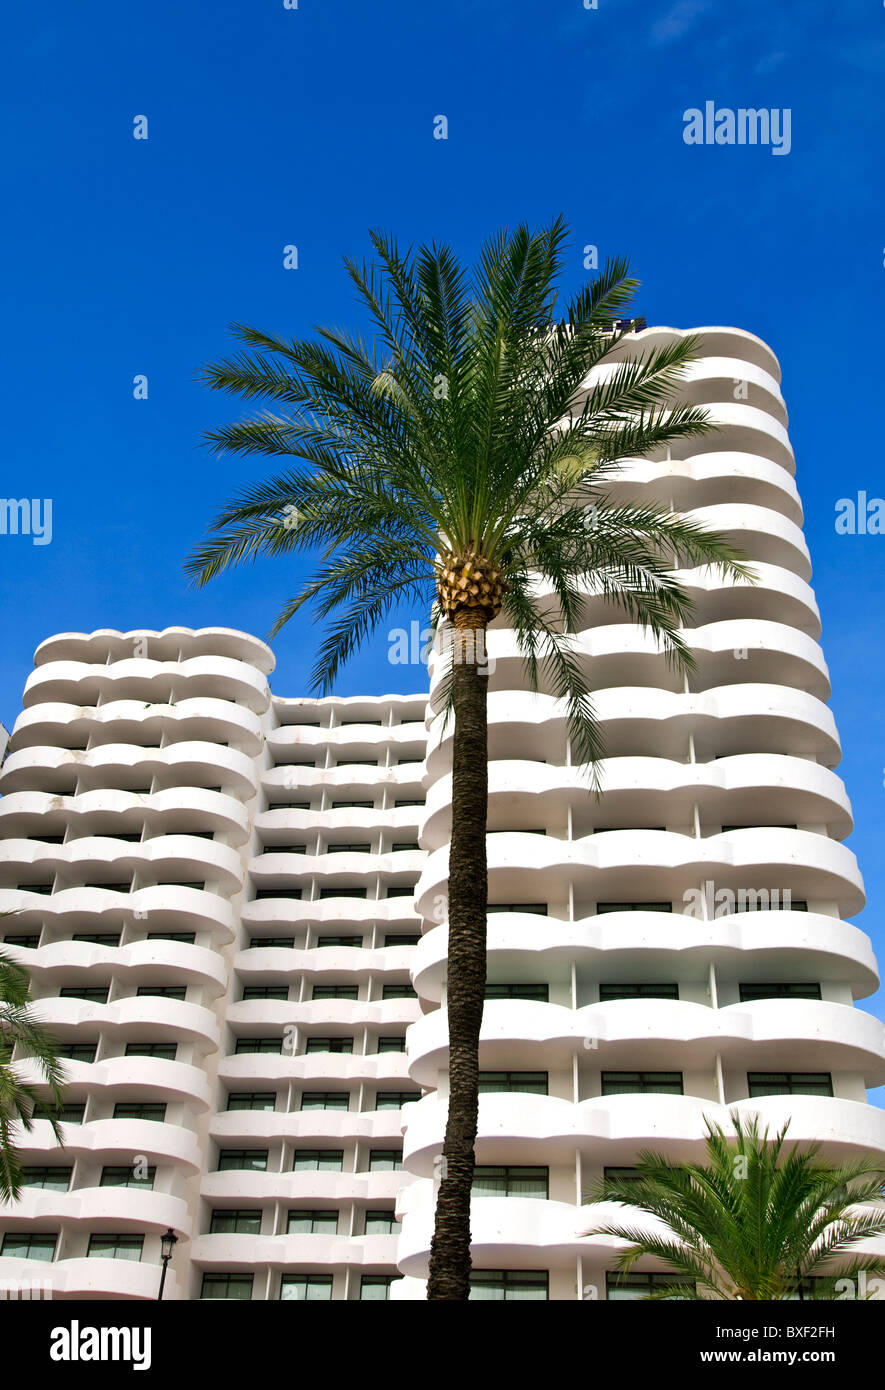 HOTEL HIGH RISE HOLIDAY PALM TREE VACATION APARTMENTS Generic attractive sunny white 5 star luxury holiday resort hotel with palm trees clear blue sky Stock Photo